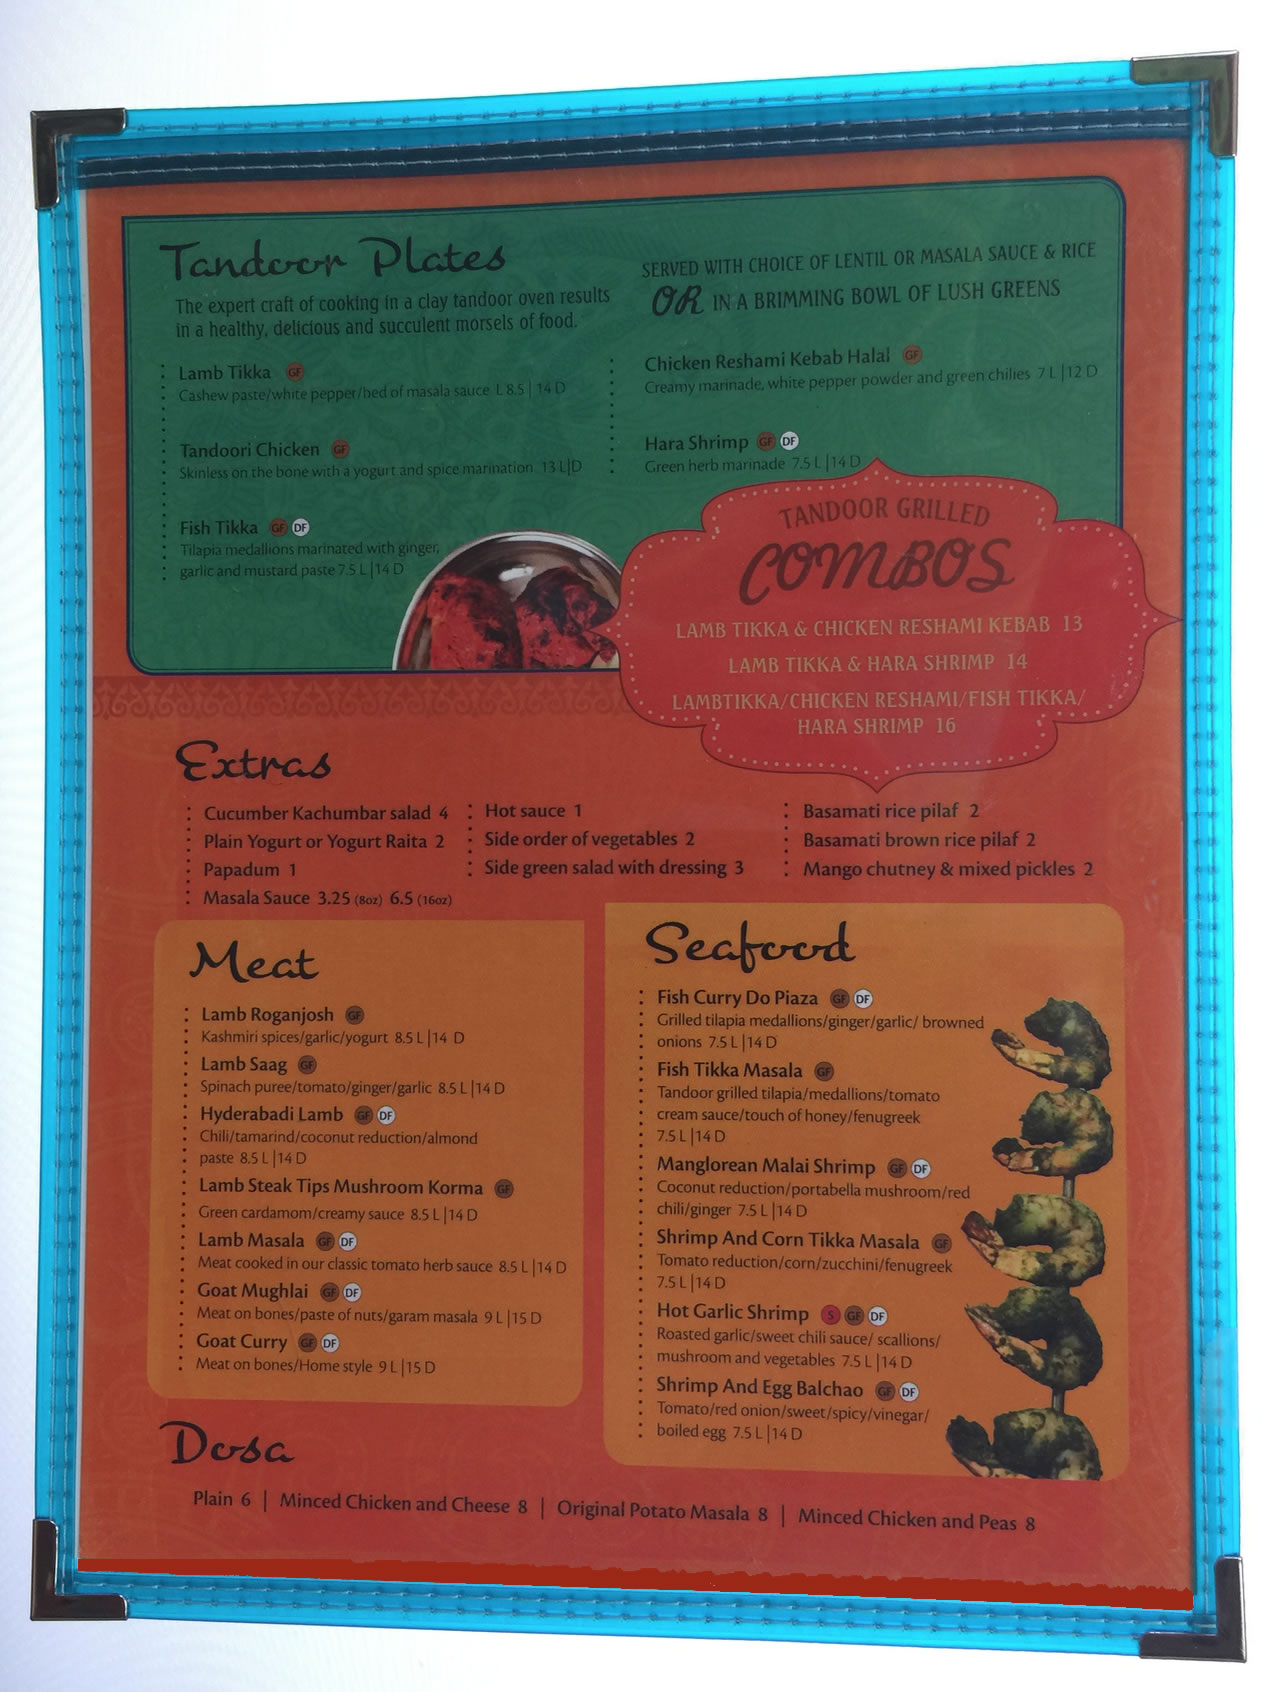 Fiesta translucent edge mexican style menu covers.